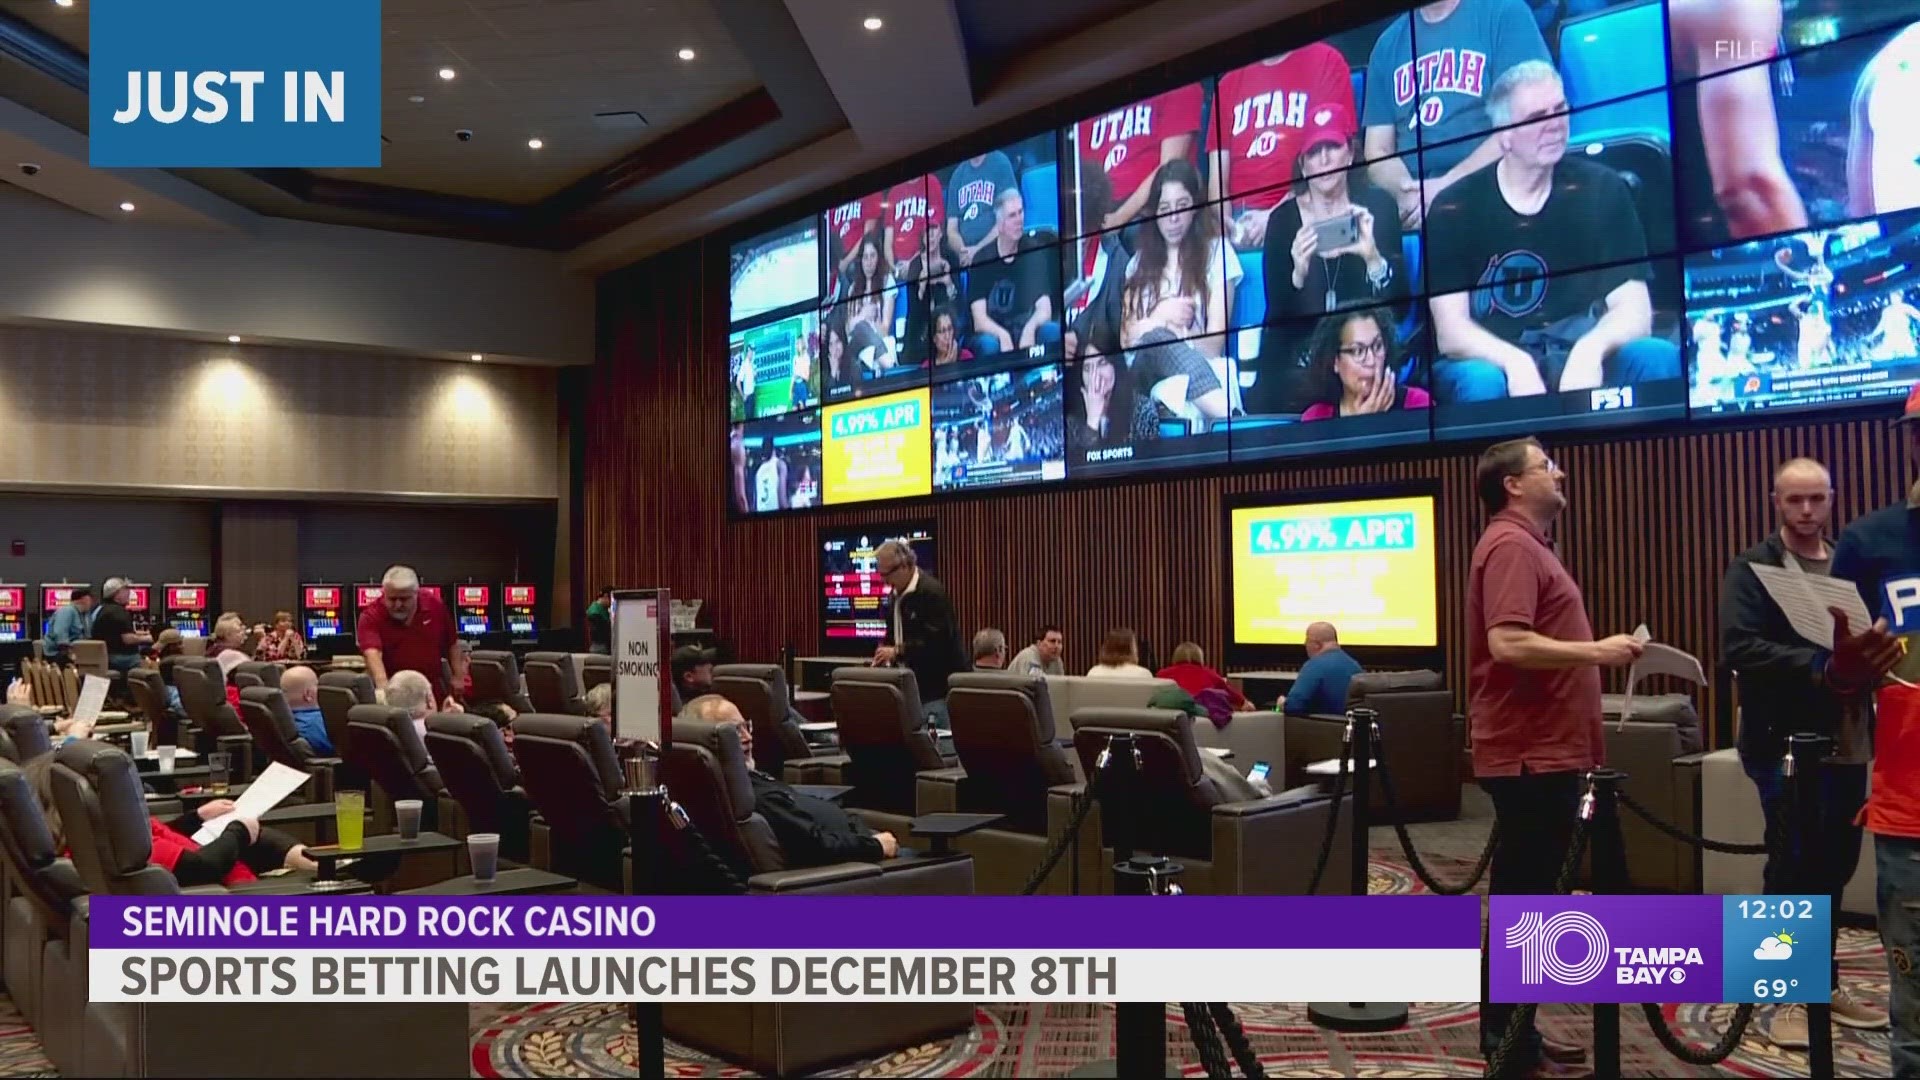 Starting in December, craps, roulette and sports betting will be available at Seminole casinos.